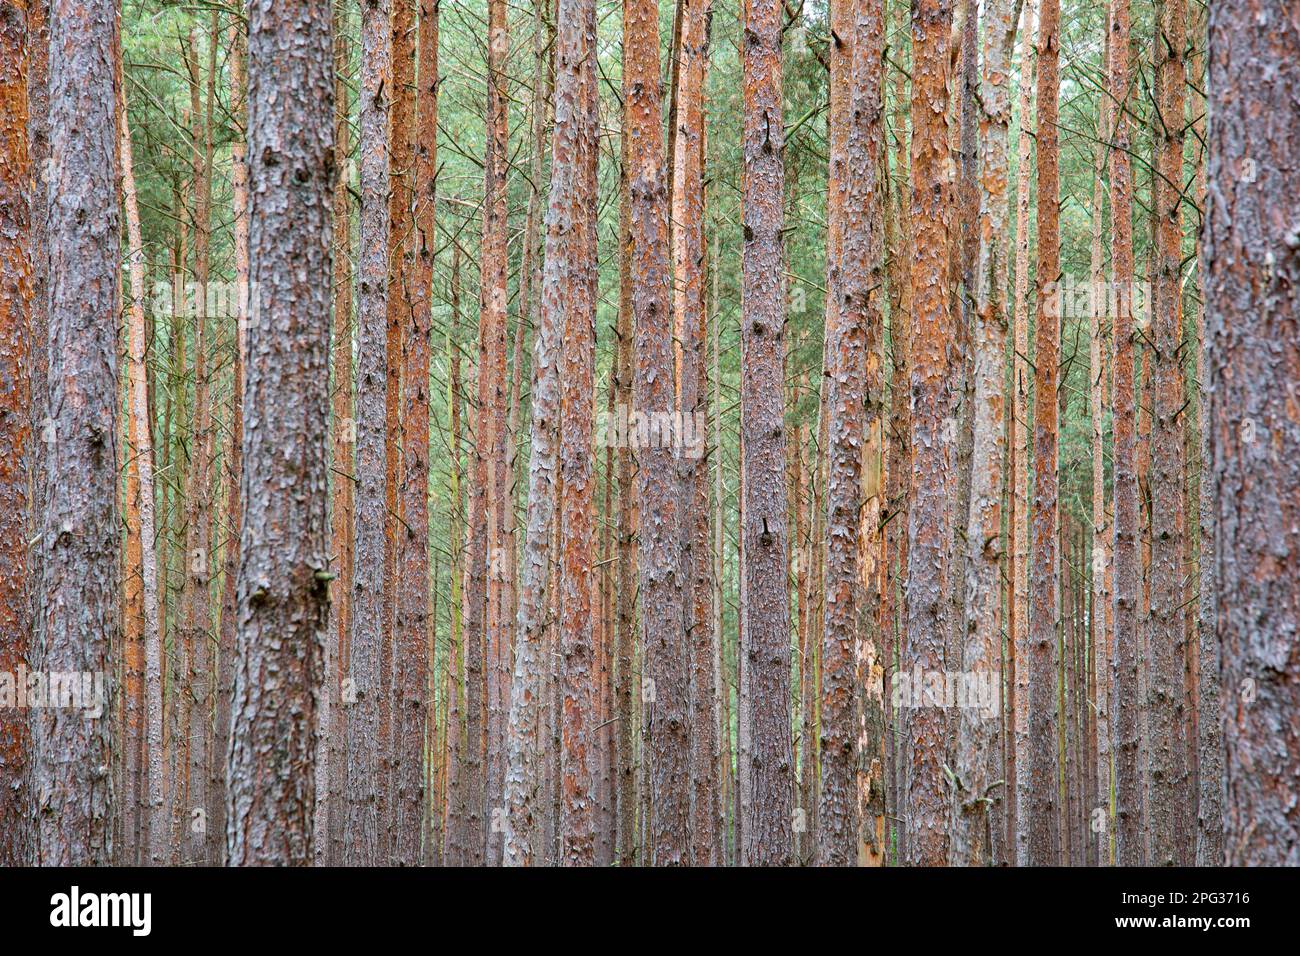 Scots Pine (Pinus sylvestris). Pine trunks close together. Germany Stock Photo